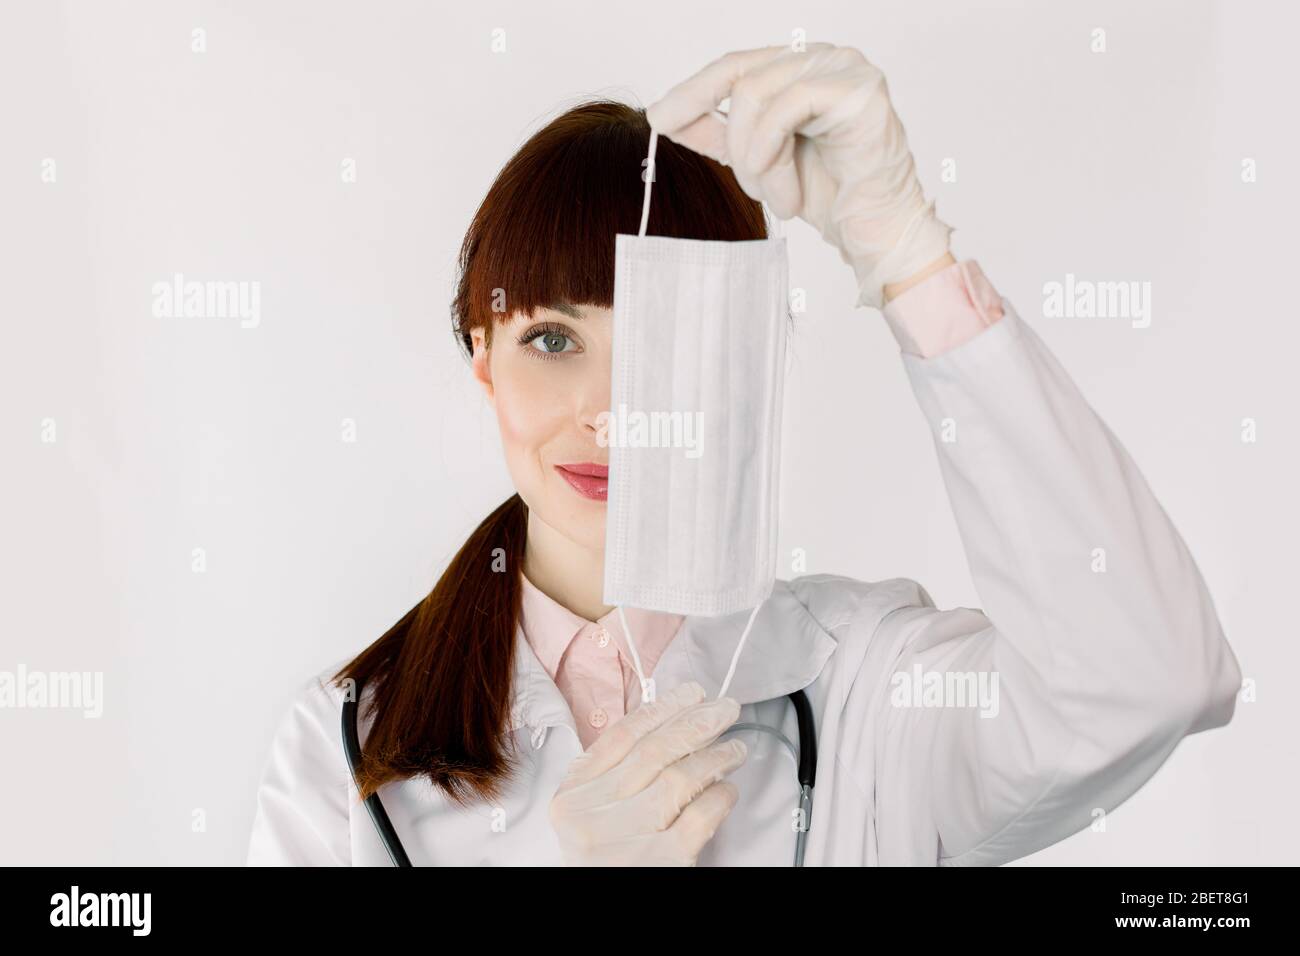 Young pretty dark haired woman doctor or nurse, wearing white coat, hides her face behind a medical mask, posing on isolated white background, copy Stock Photo